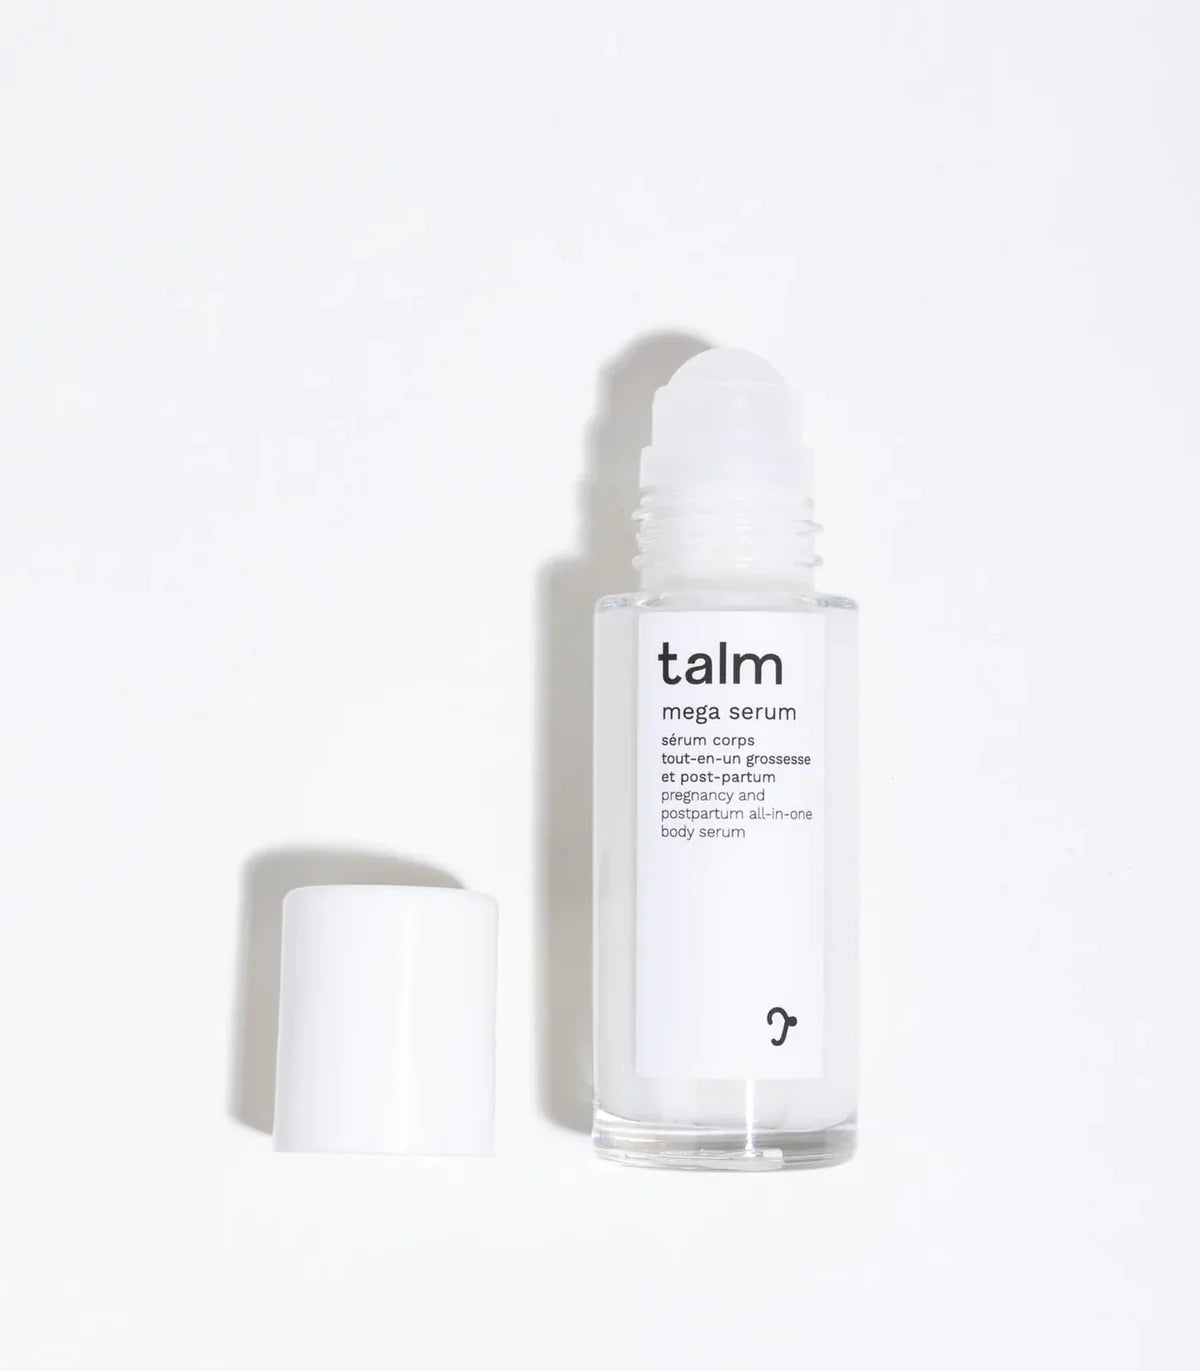 Talm - All-in-one body serum for pregnancy and postpartum (50ml)